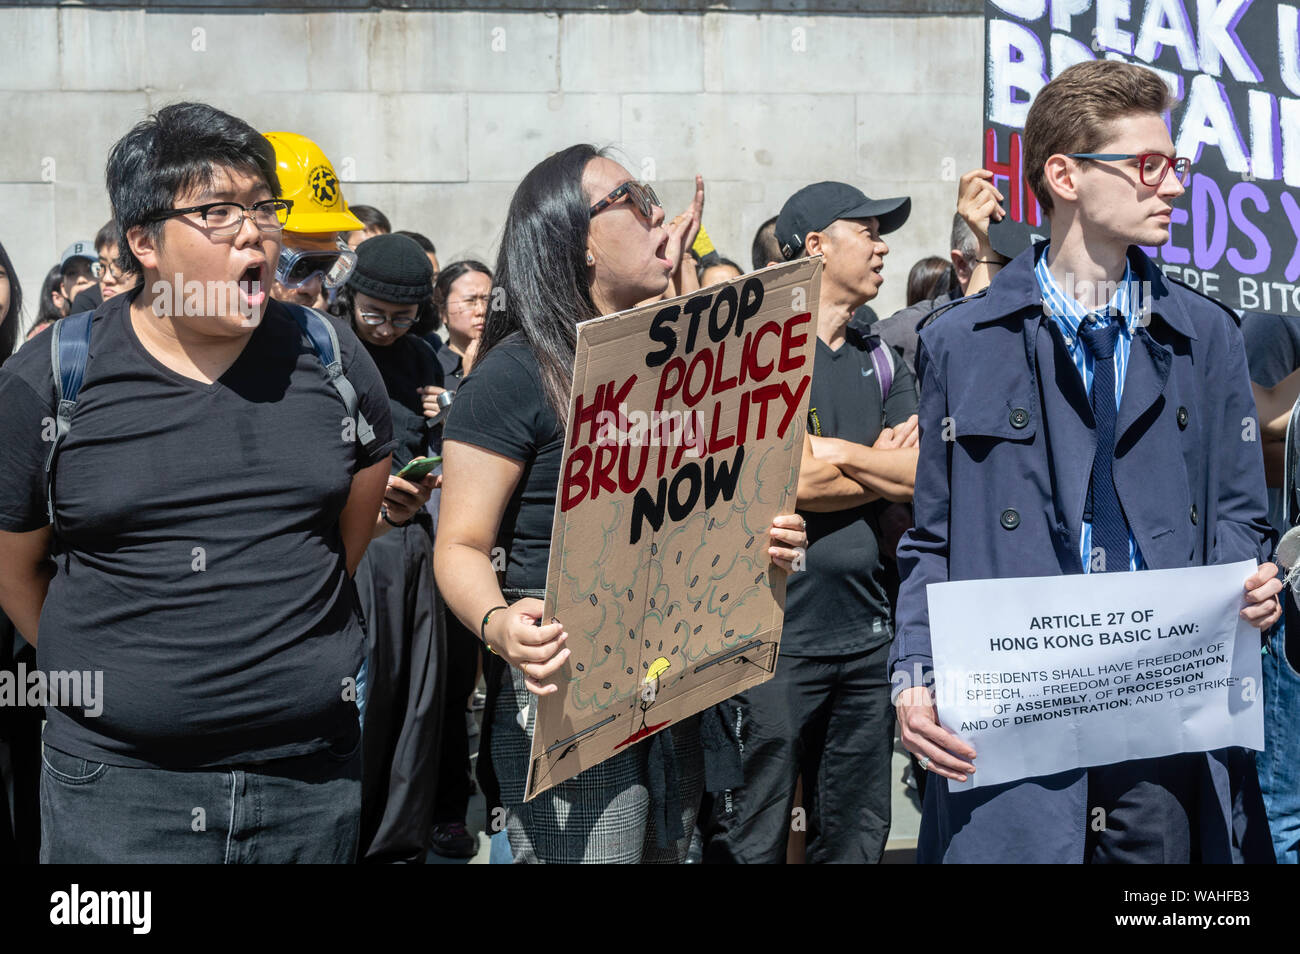 London, United Kingdom - August 17,  2019: Supporters of the UK Solidarity with Hong Kong rally chanting against those in opposition to them, Stock Photo